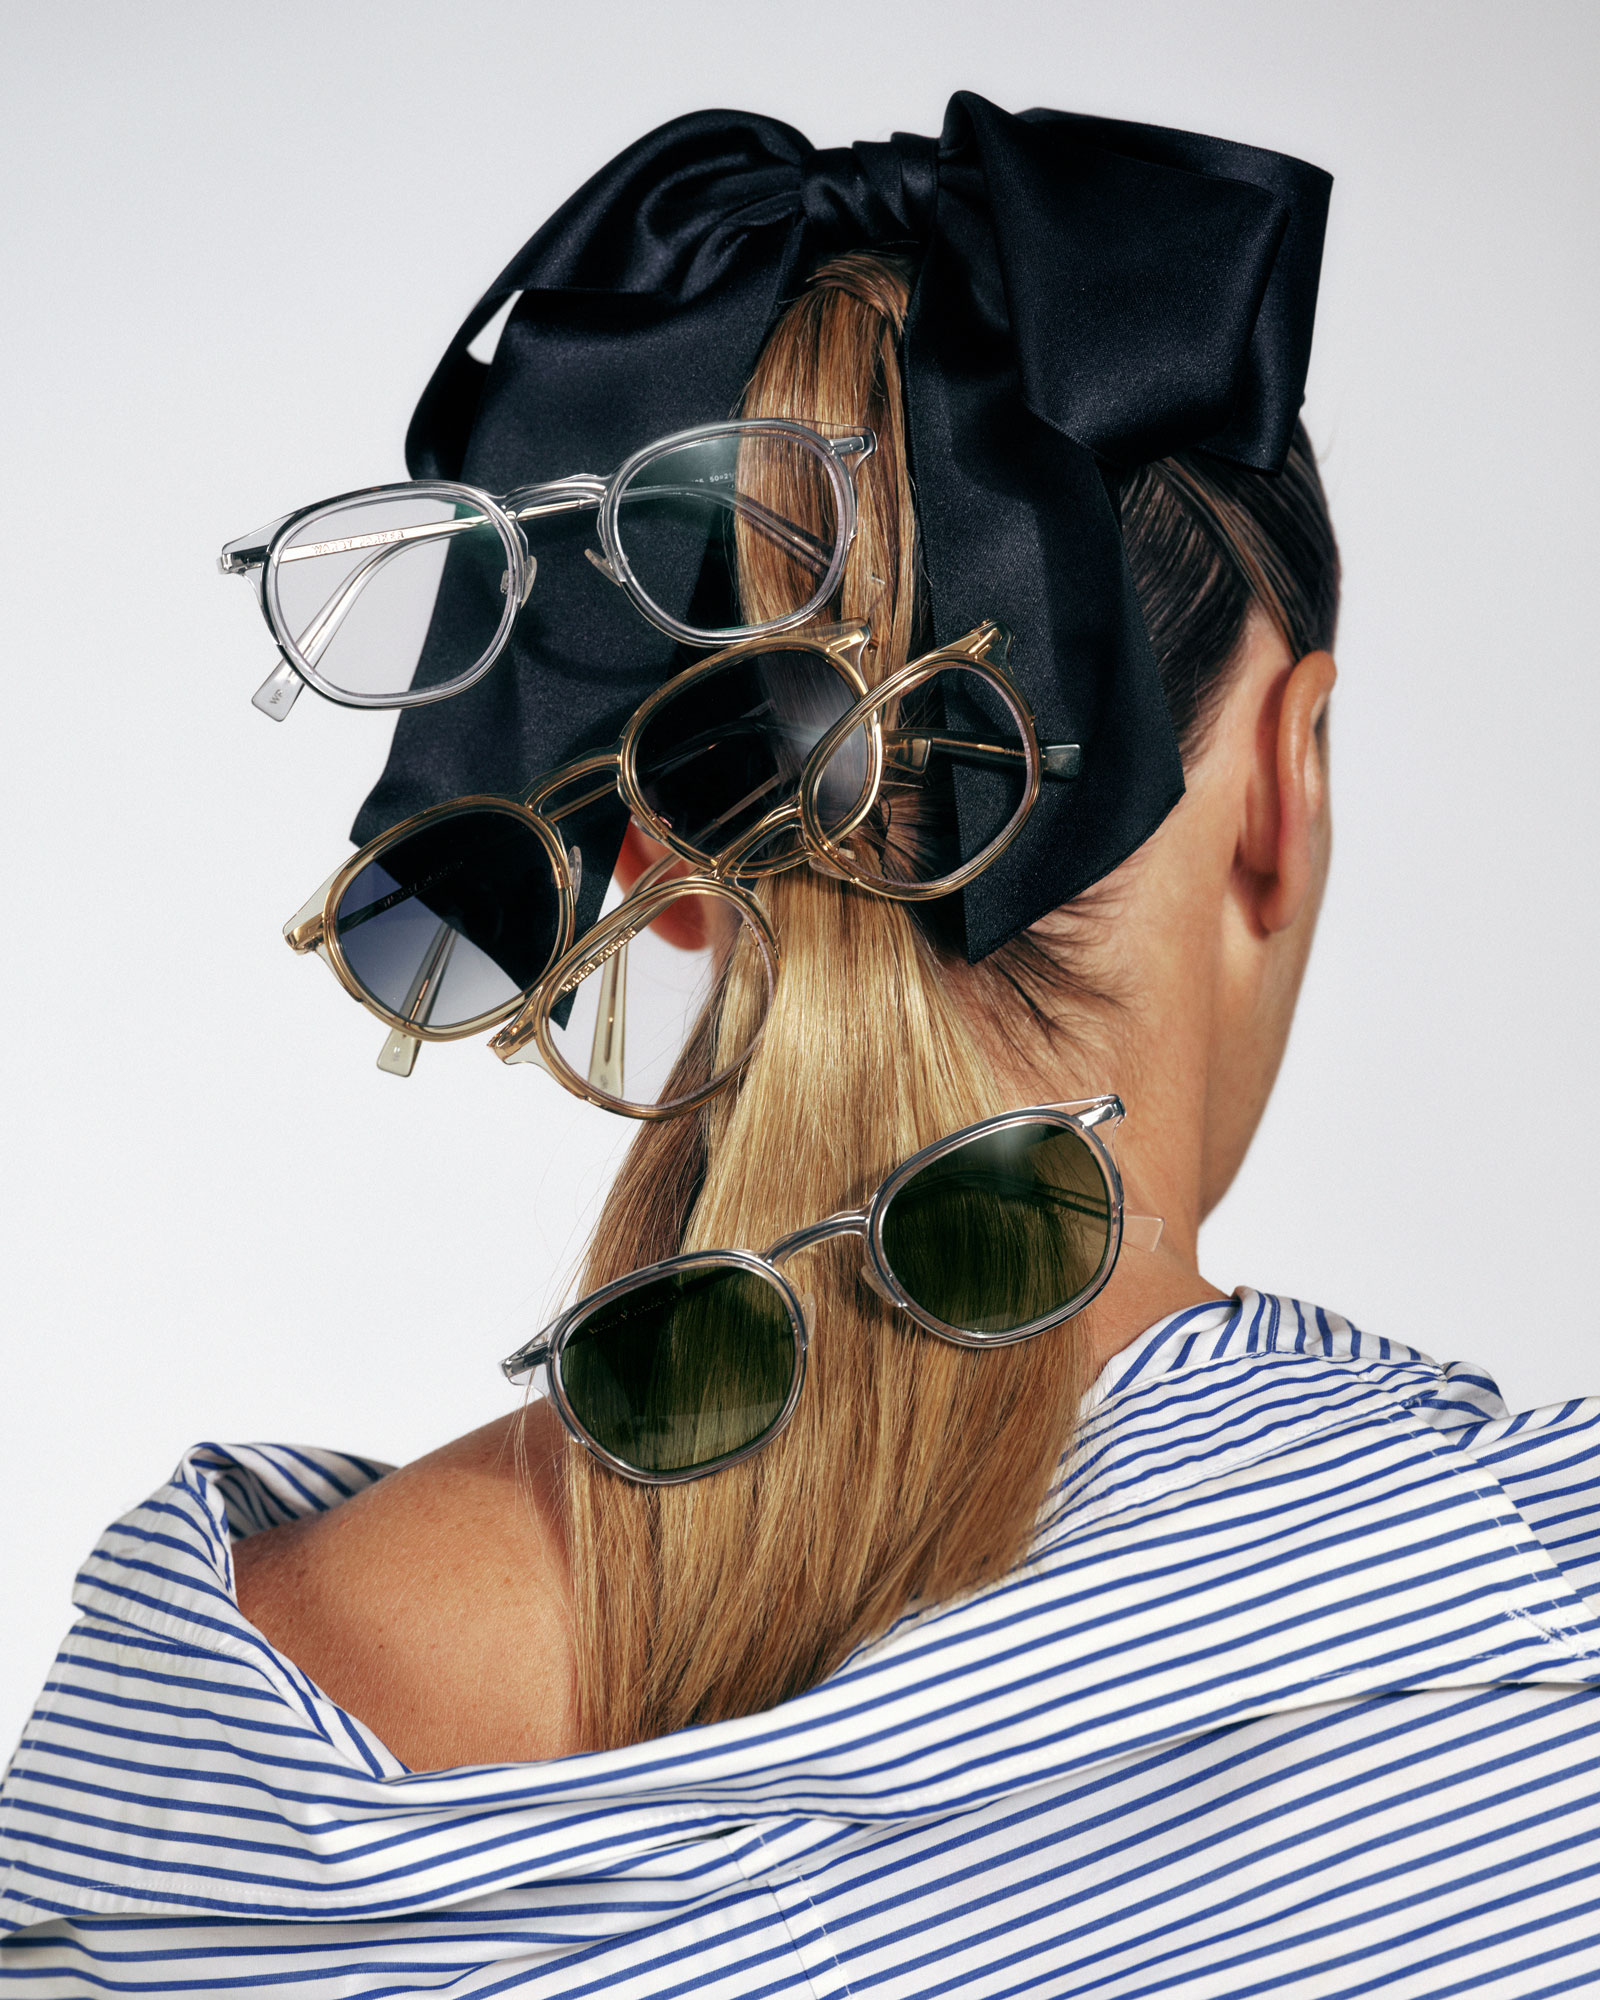 chloe Sevigny models her warby parker eyewear collection